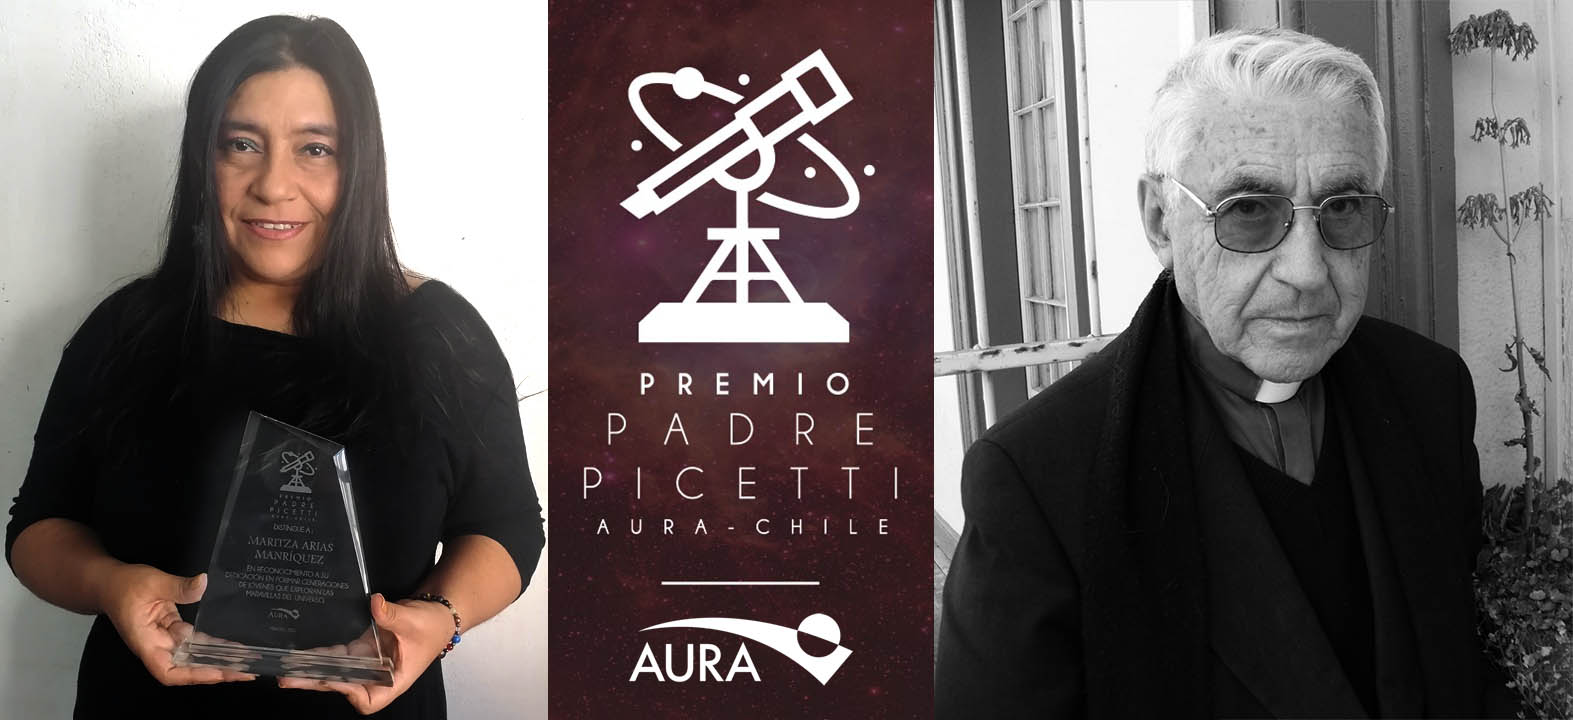 Award winner Maritza Arias from Vicuña holding her trophy (left) and Padre Picetti (right) with the Picetti Prize logo in the center